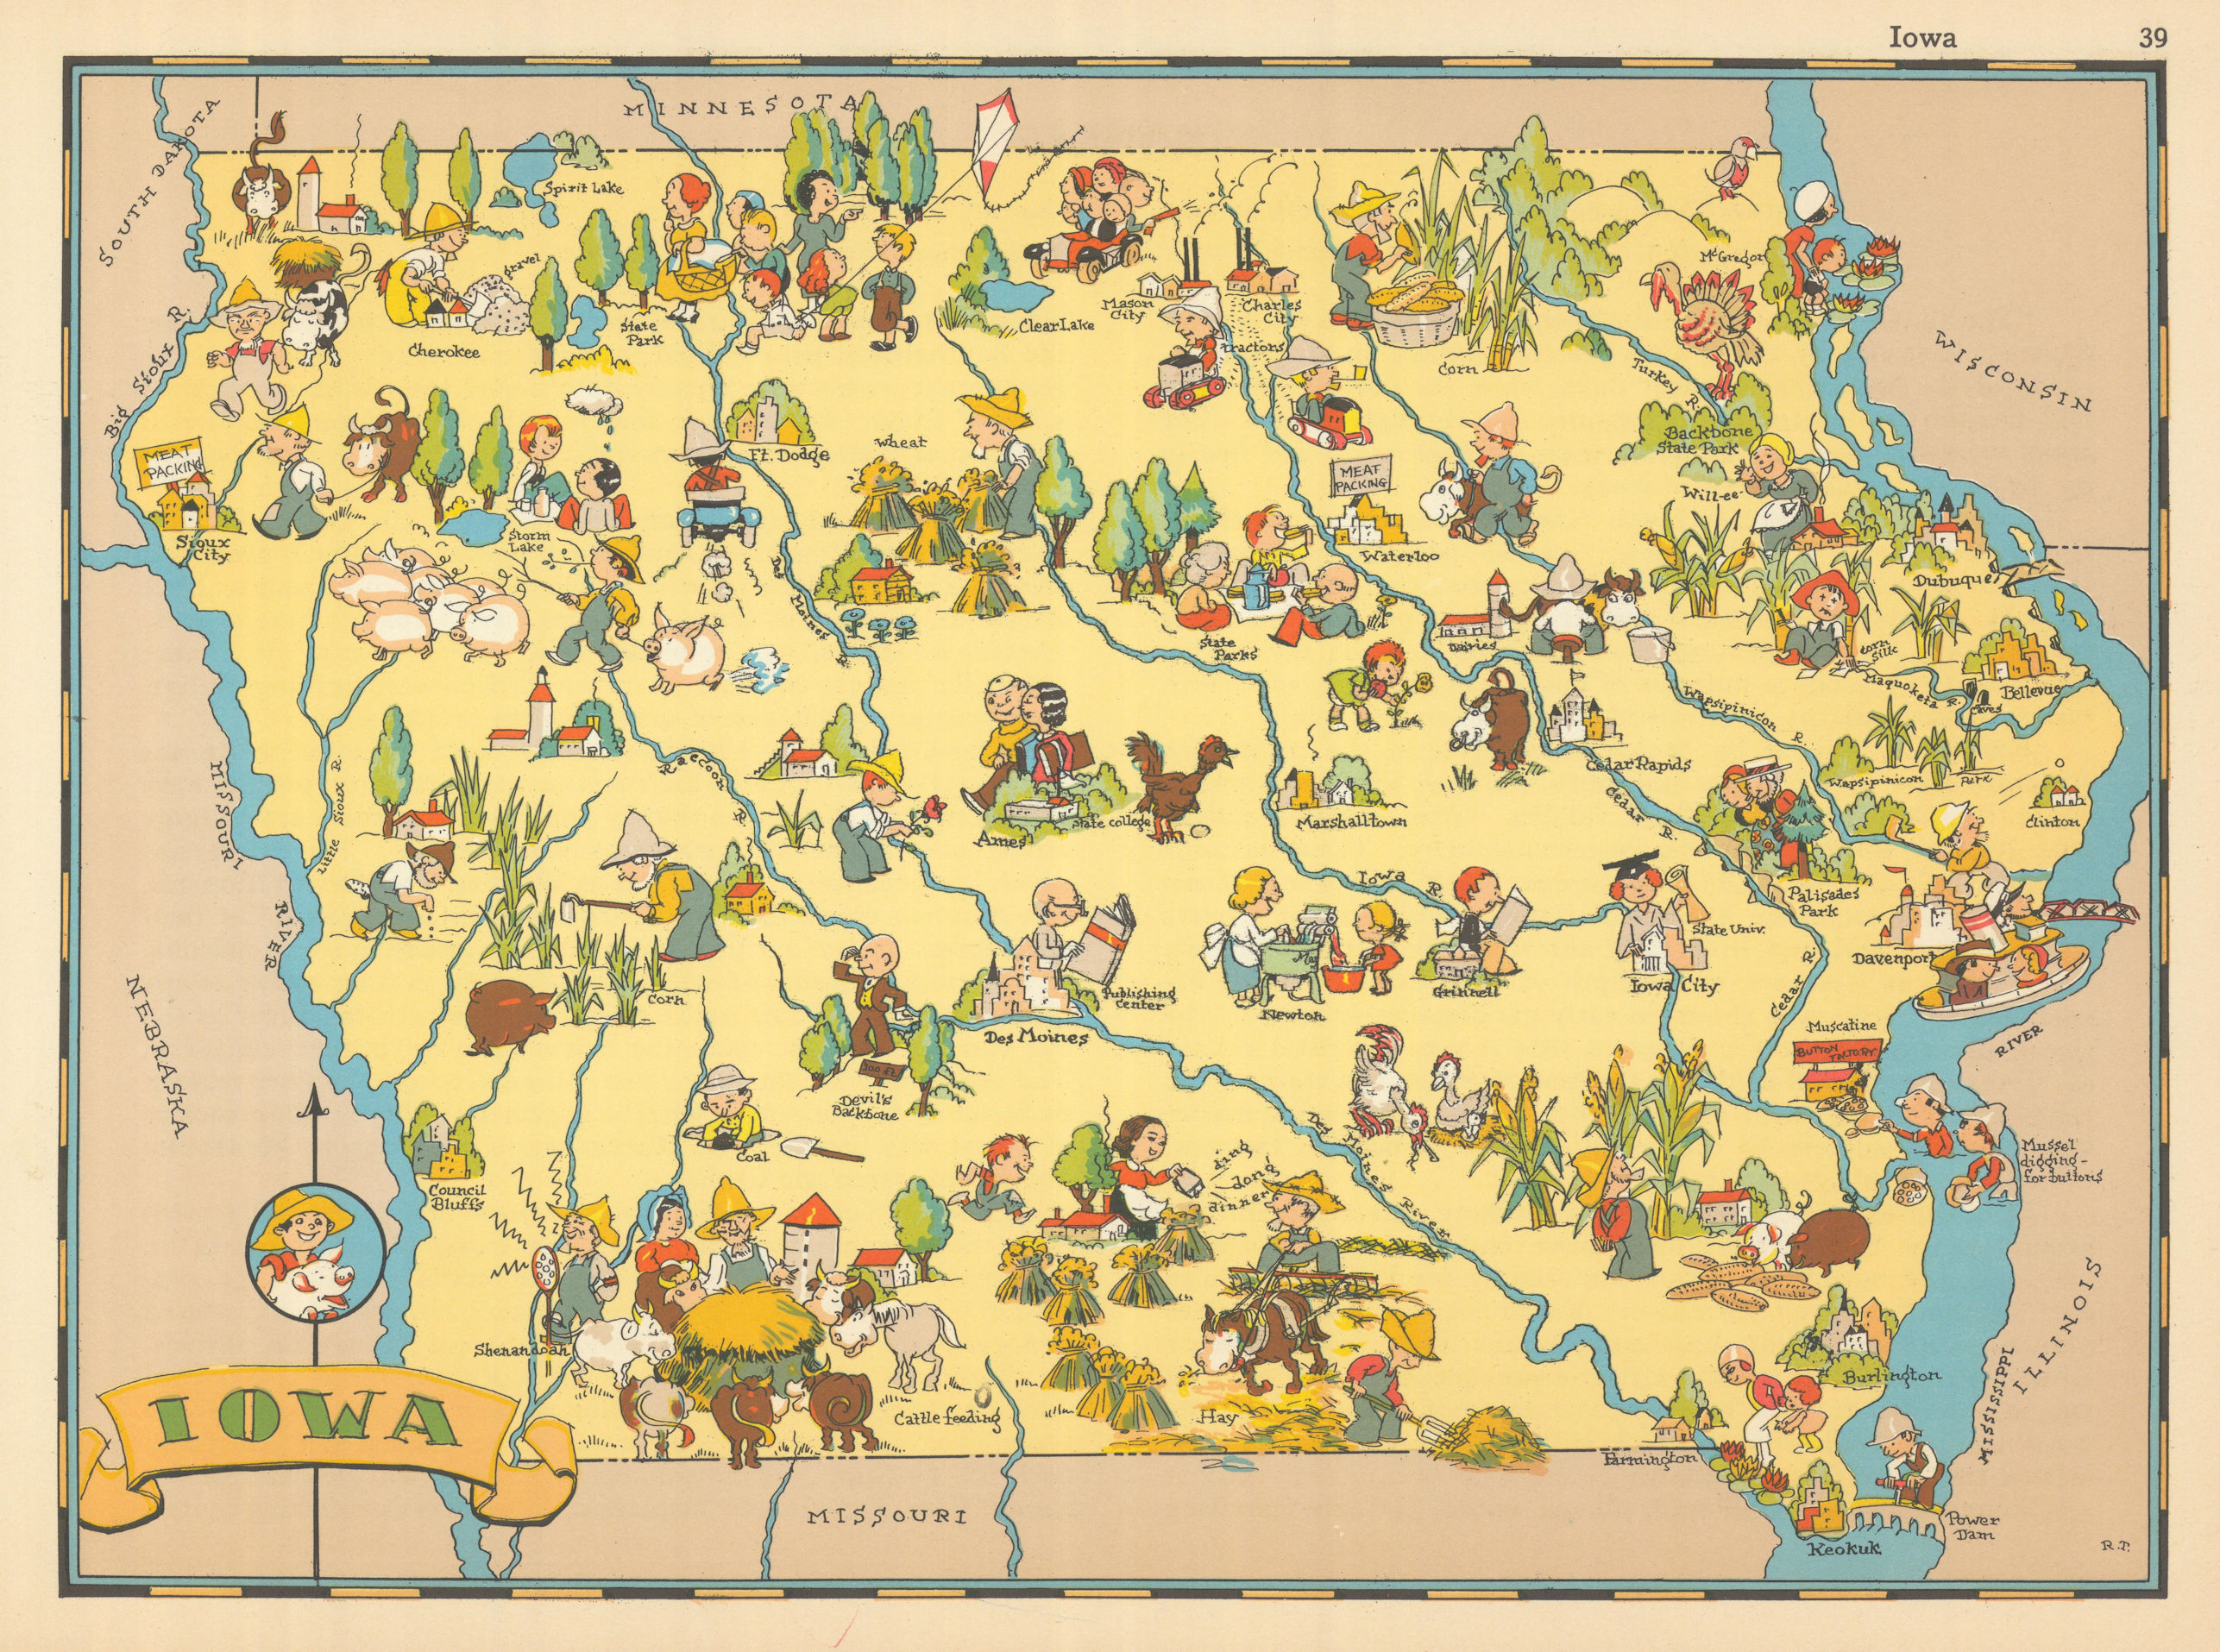 Associate Product Iowa. Pictorial state map by Ruth Taylor White 1935 old vintage plan chart